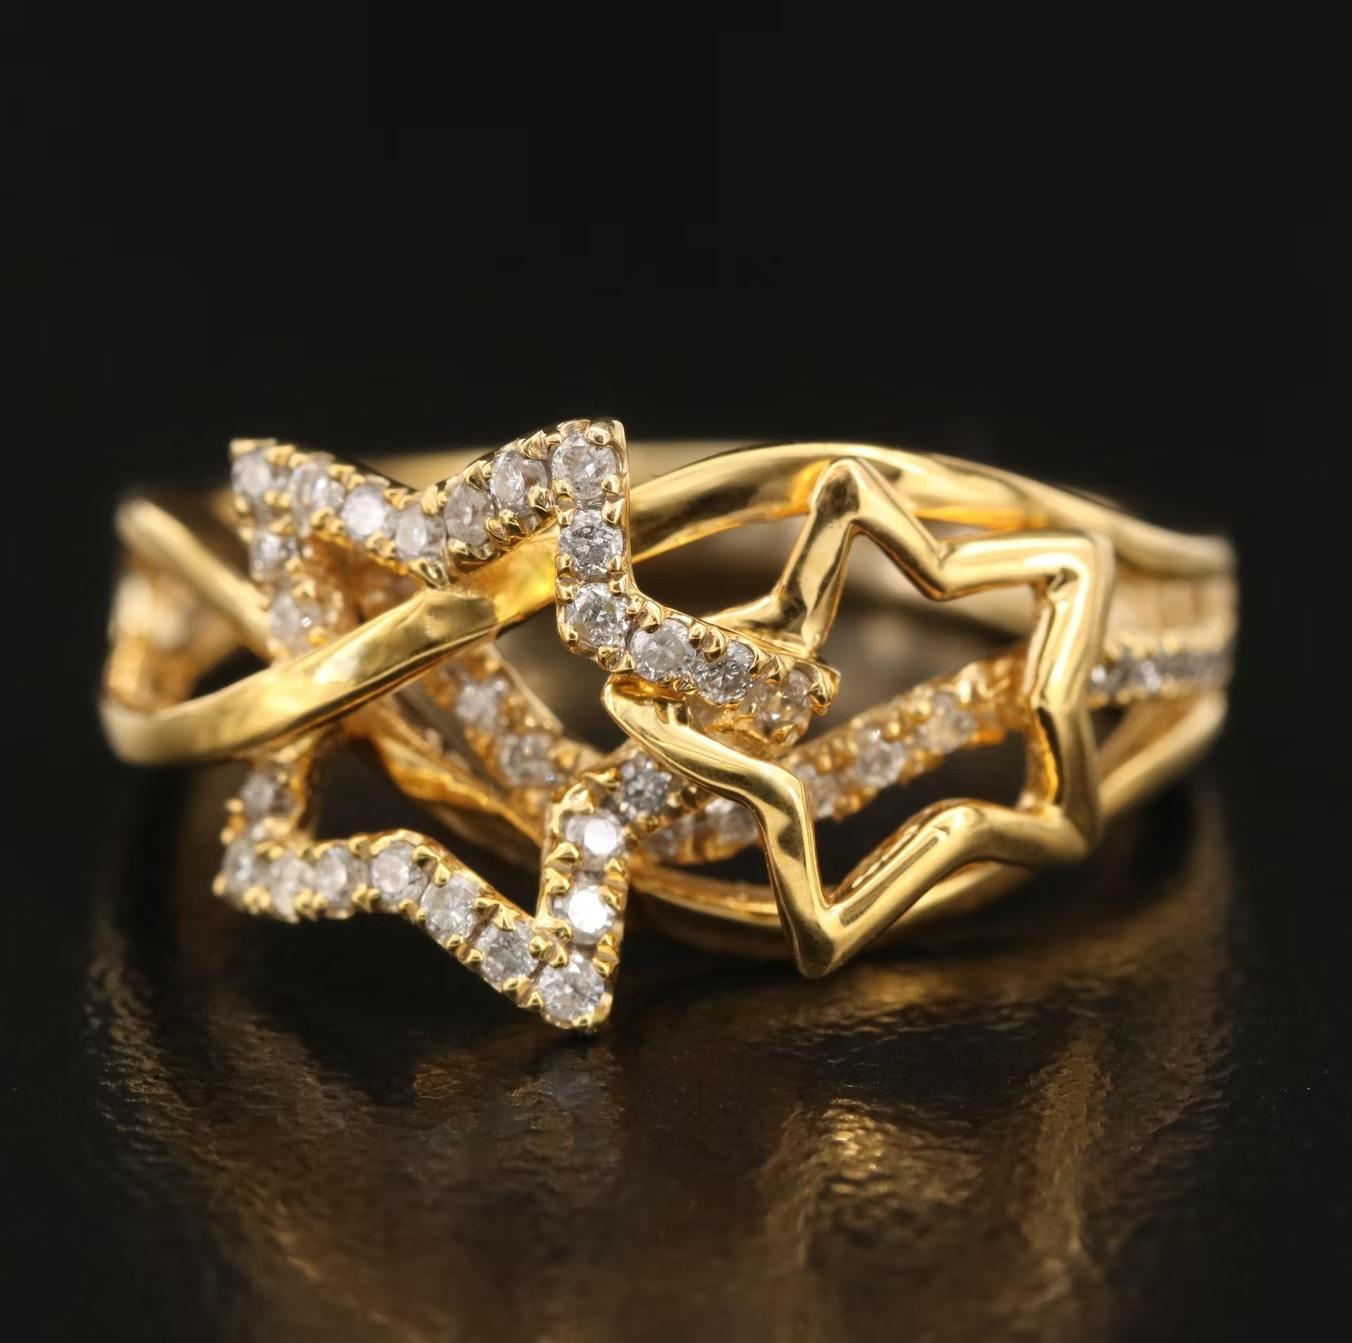 AVJX House of Design NY, stamped and hallmarked with the designer Hallmarks

NEW WITH TAGS, Tag Price $3750

Amazing 3D star Star design with diamond

0.35 CT of High Quality Diamond (G / SI diamond), high quality colorless
        
14K Yellow gold,